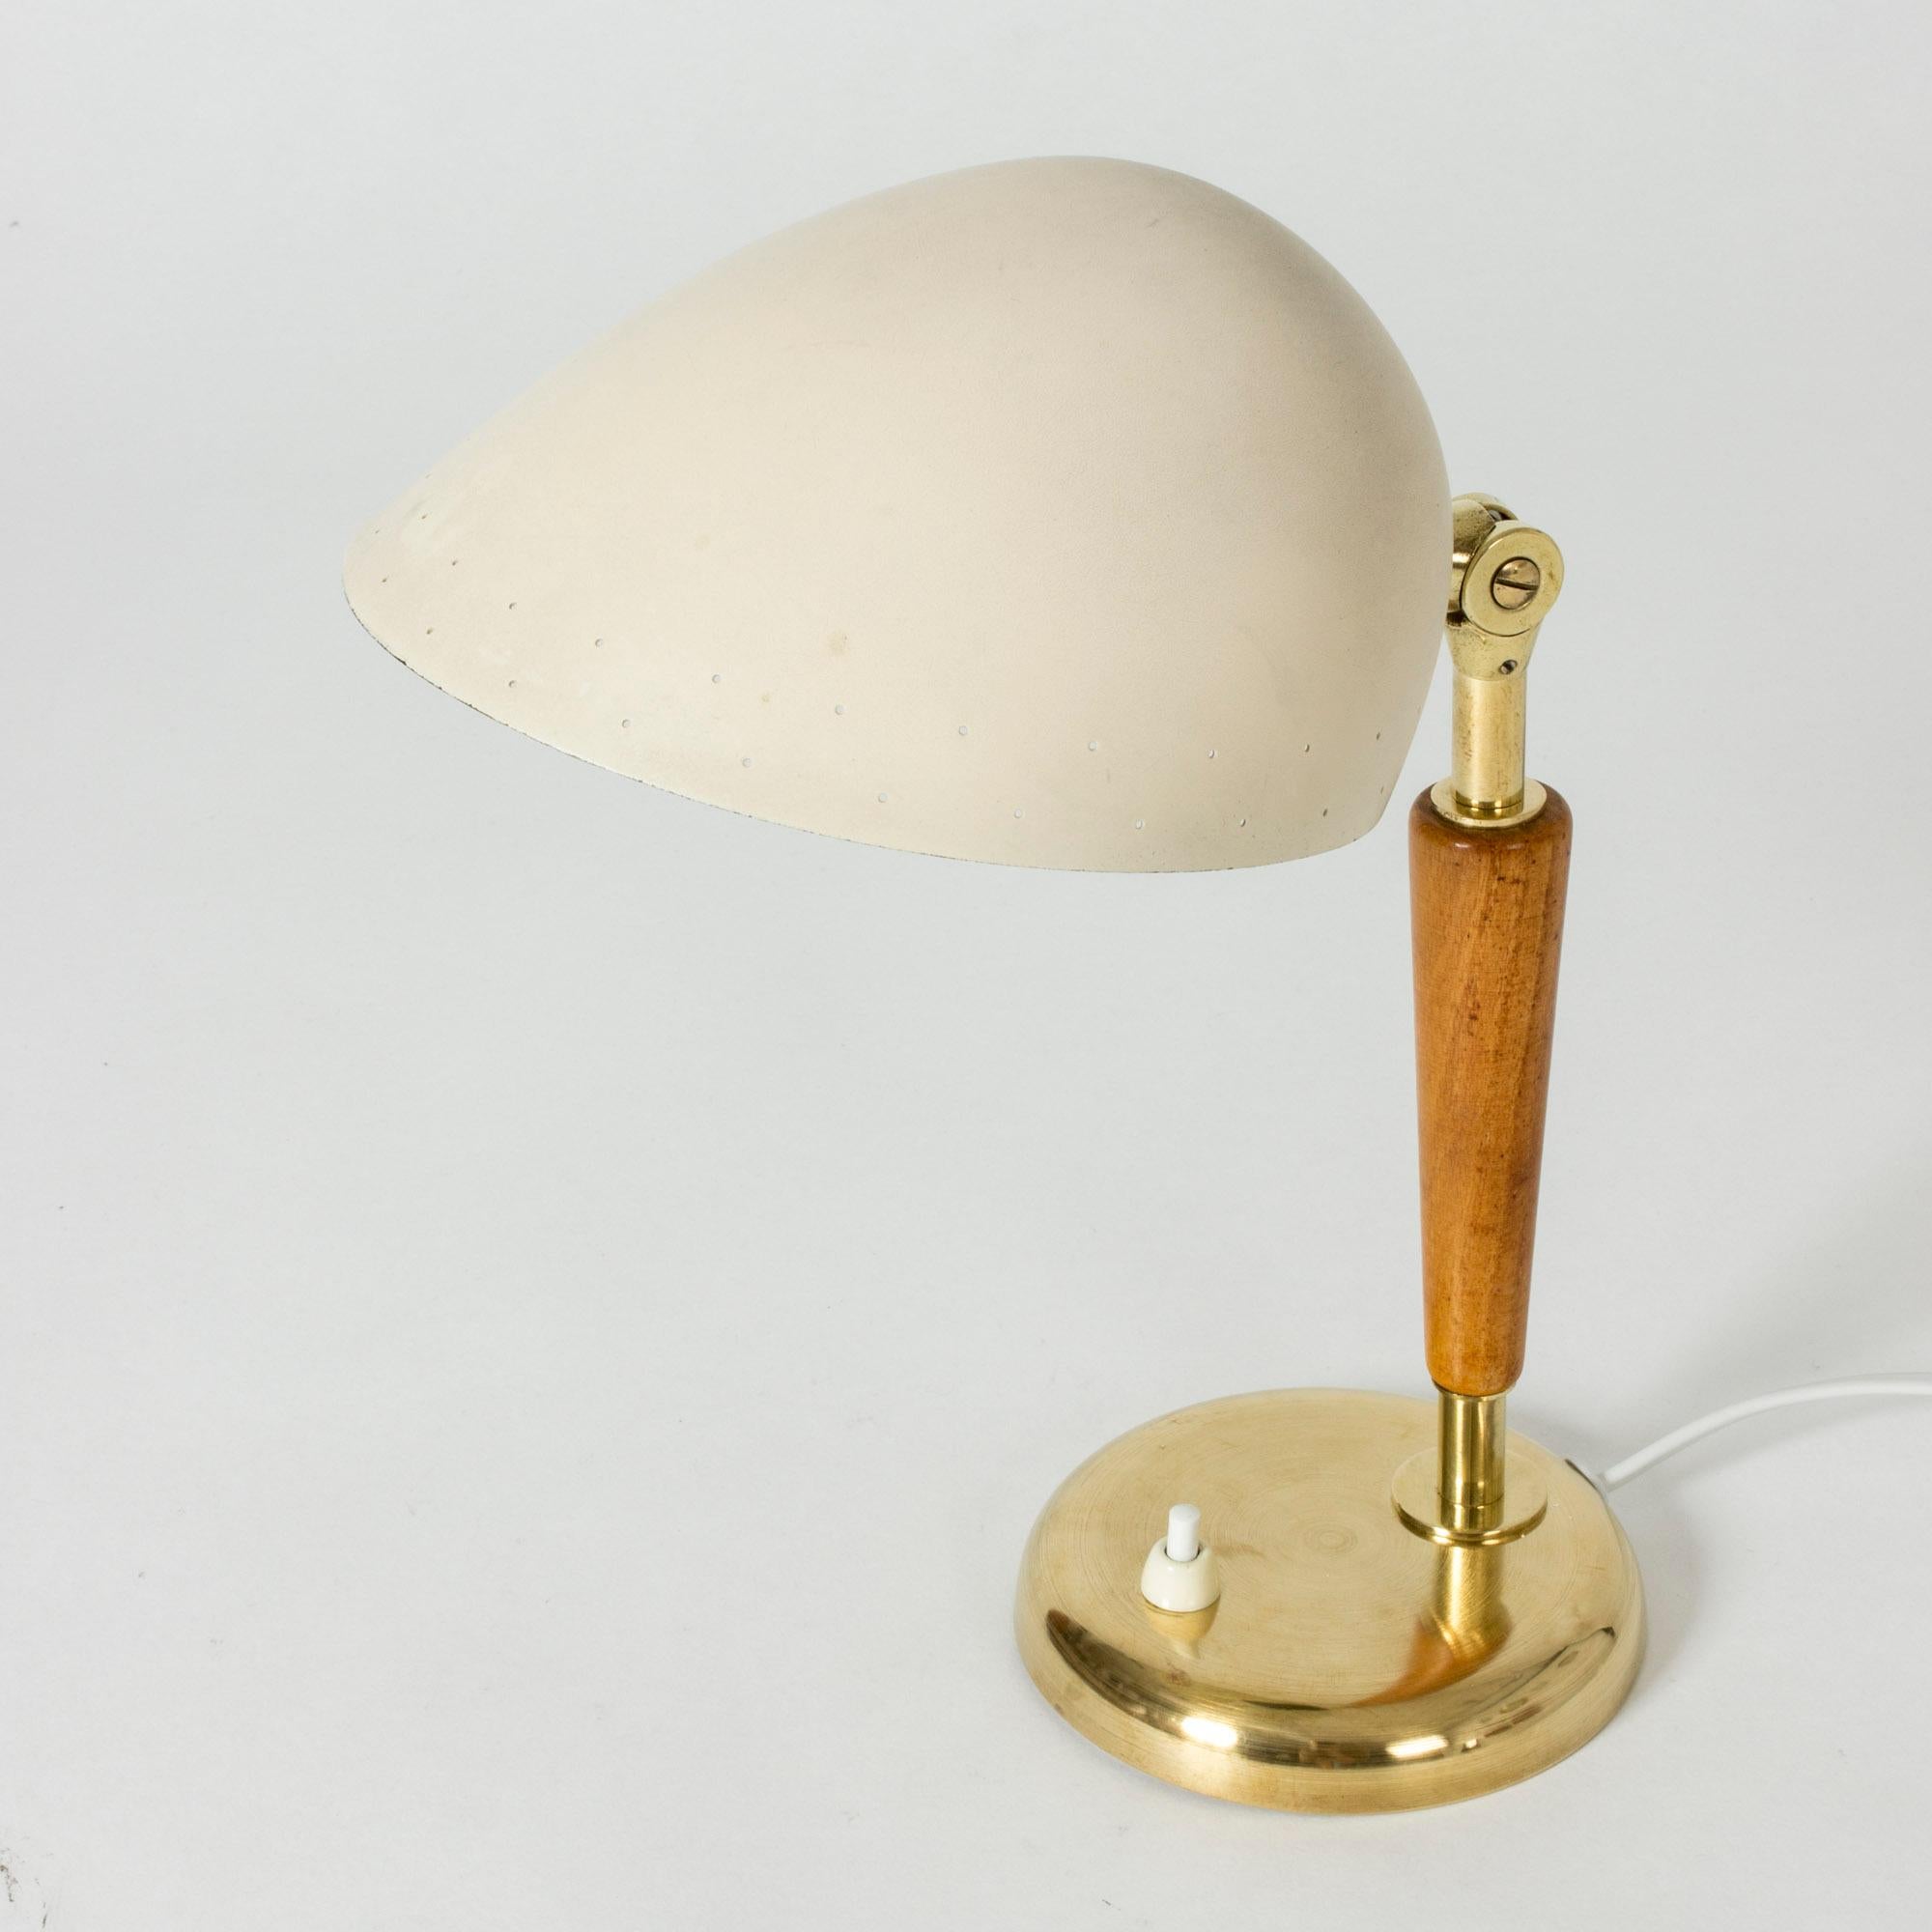 Neat, small table or desk lamp from Böhlmarks. Made from brass with a smooth wooden handle and an oval, streamlined metal shade. Cream colored lacquer.
      